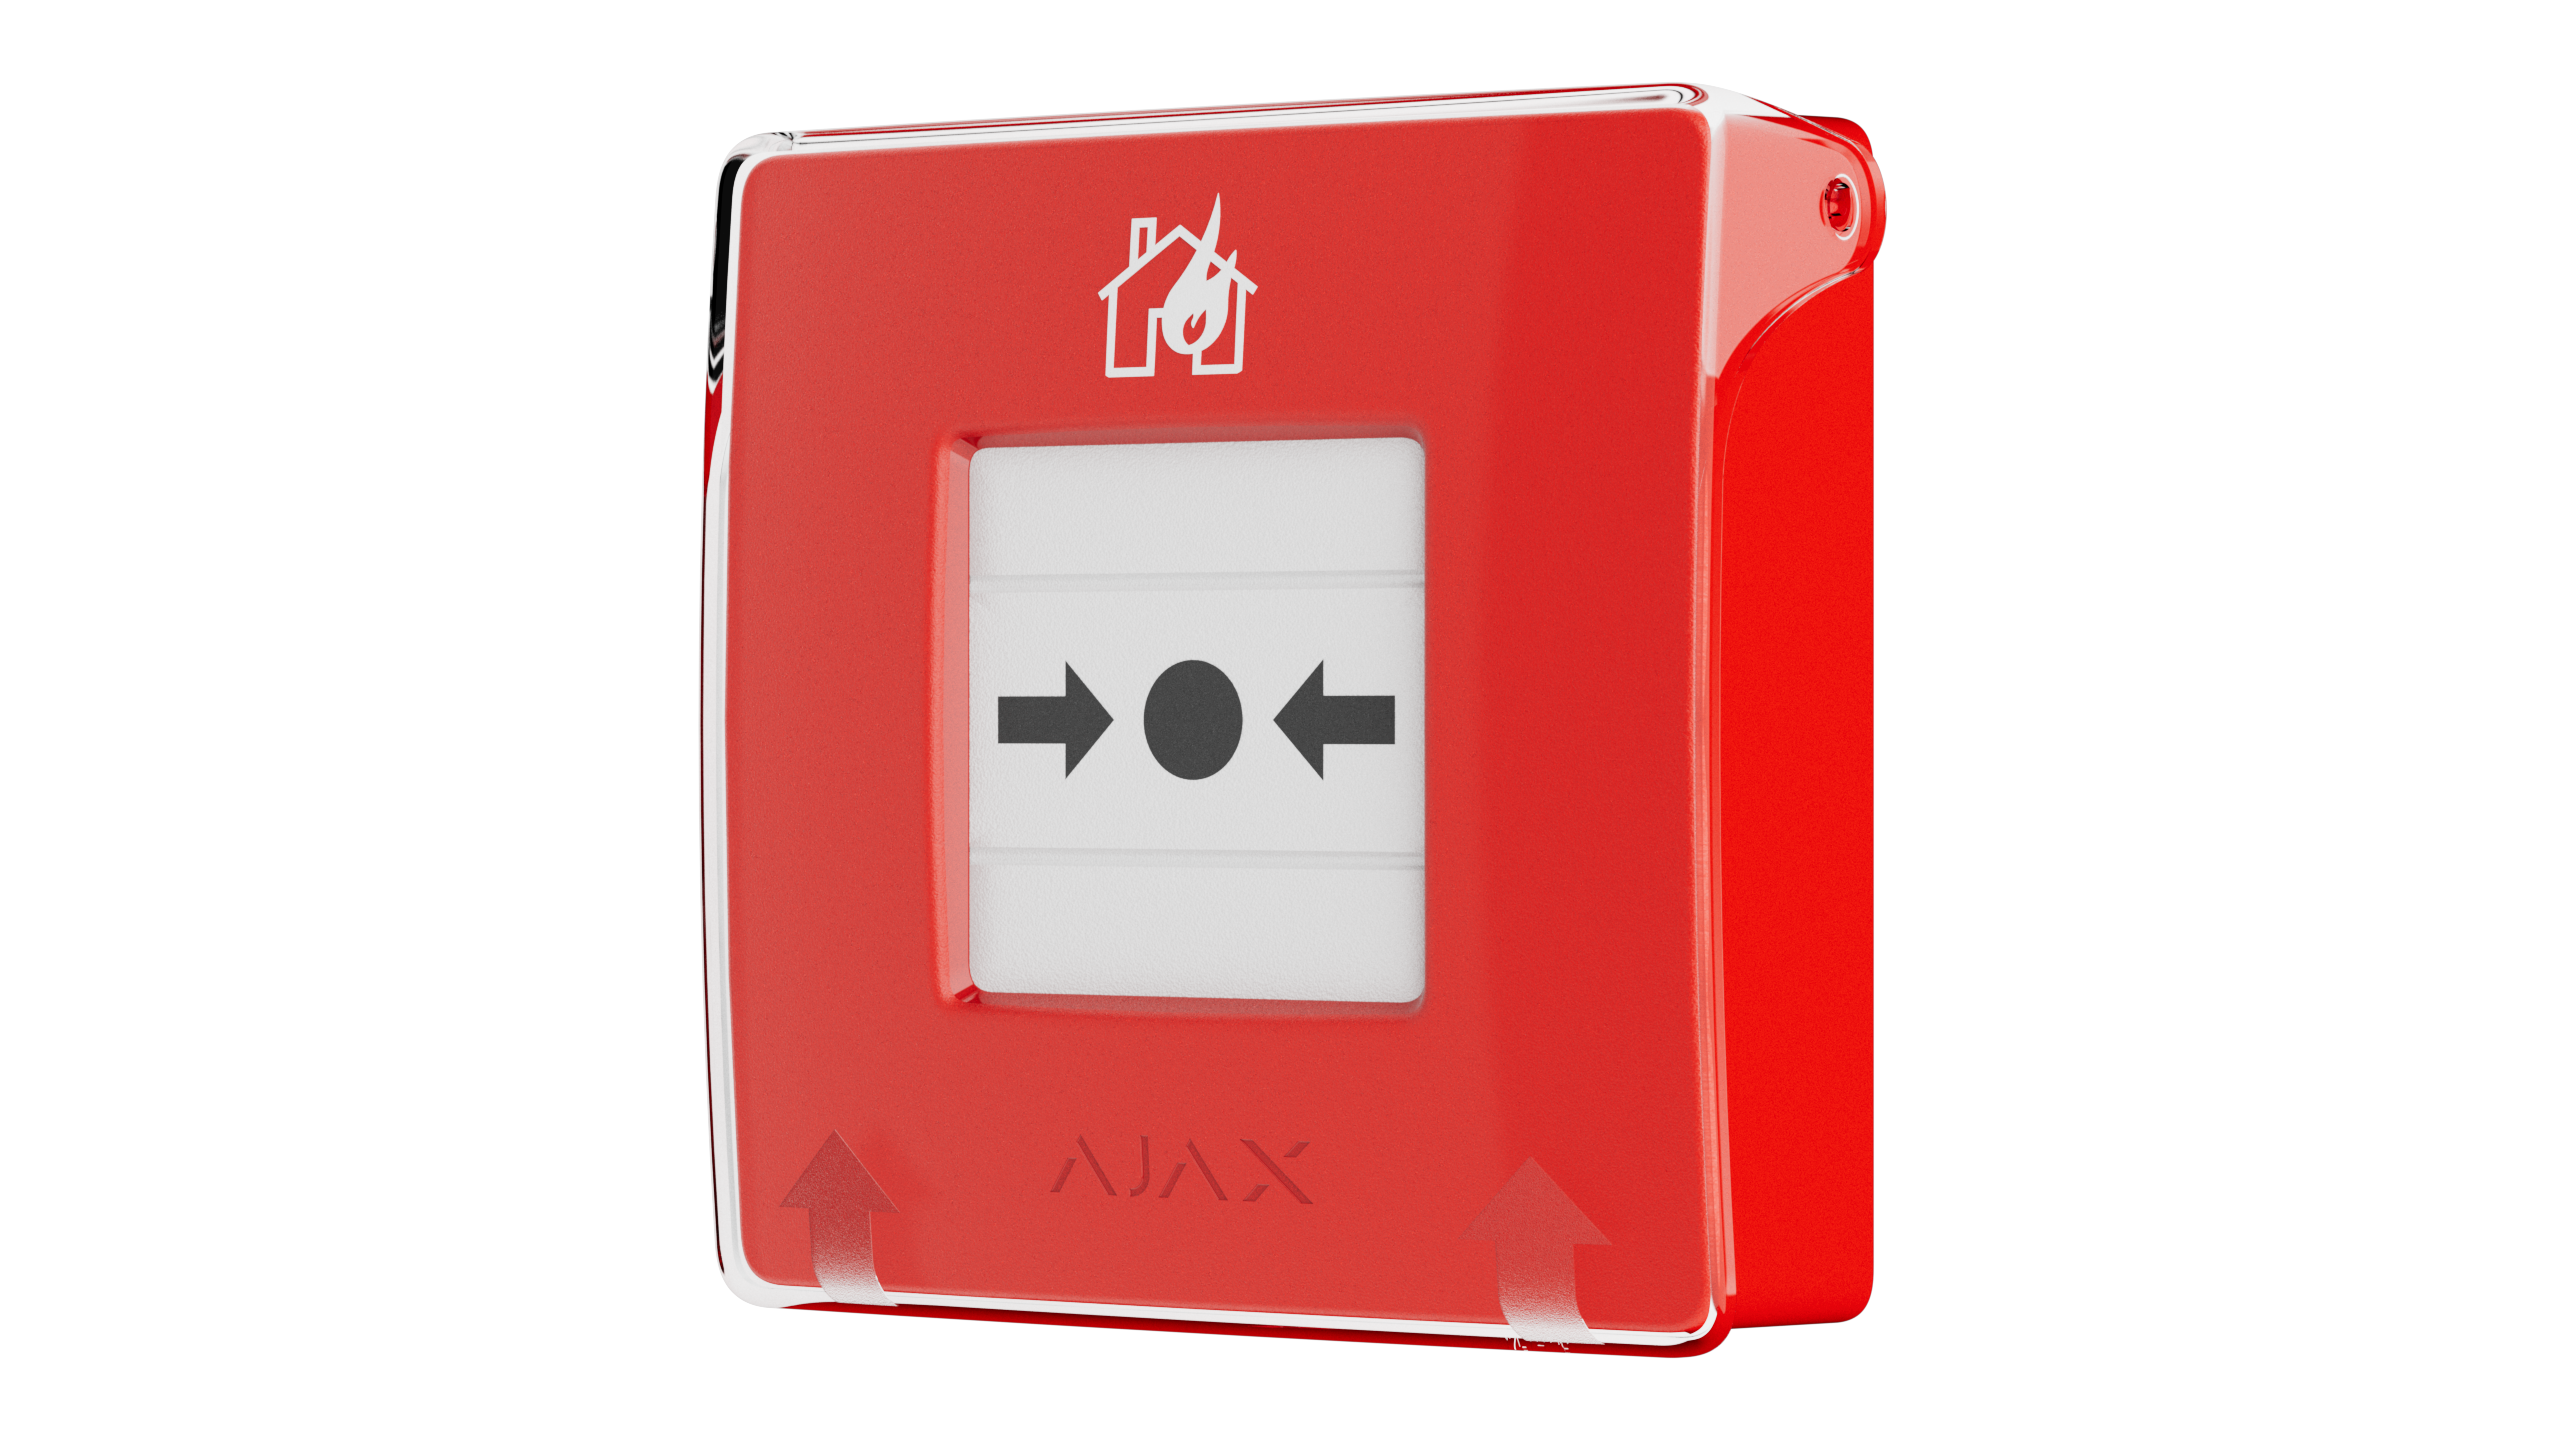 Manual Call Point (Red) Feueralarm